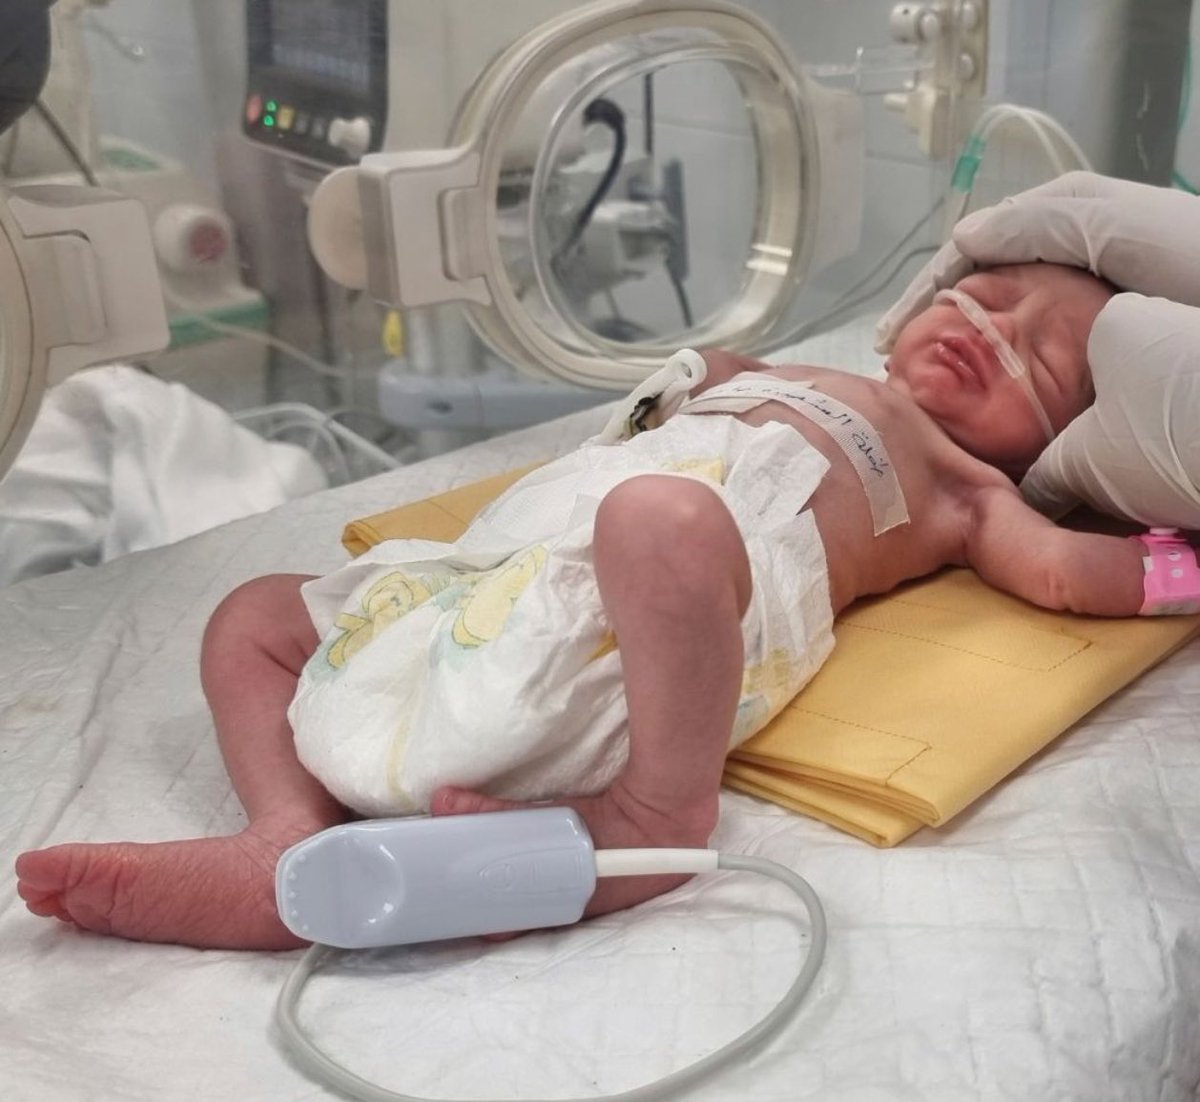 “Sabreen Jouda came into the world seconds after her mother left it. Their home was hit by an Israeli airstrike shortly before midnight Saturday. Until that moment, the family was like so many other Palestinians trying to shelter from the war in Gaza's southernmost city of